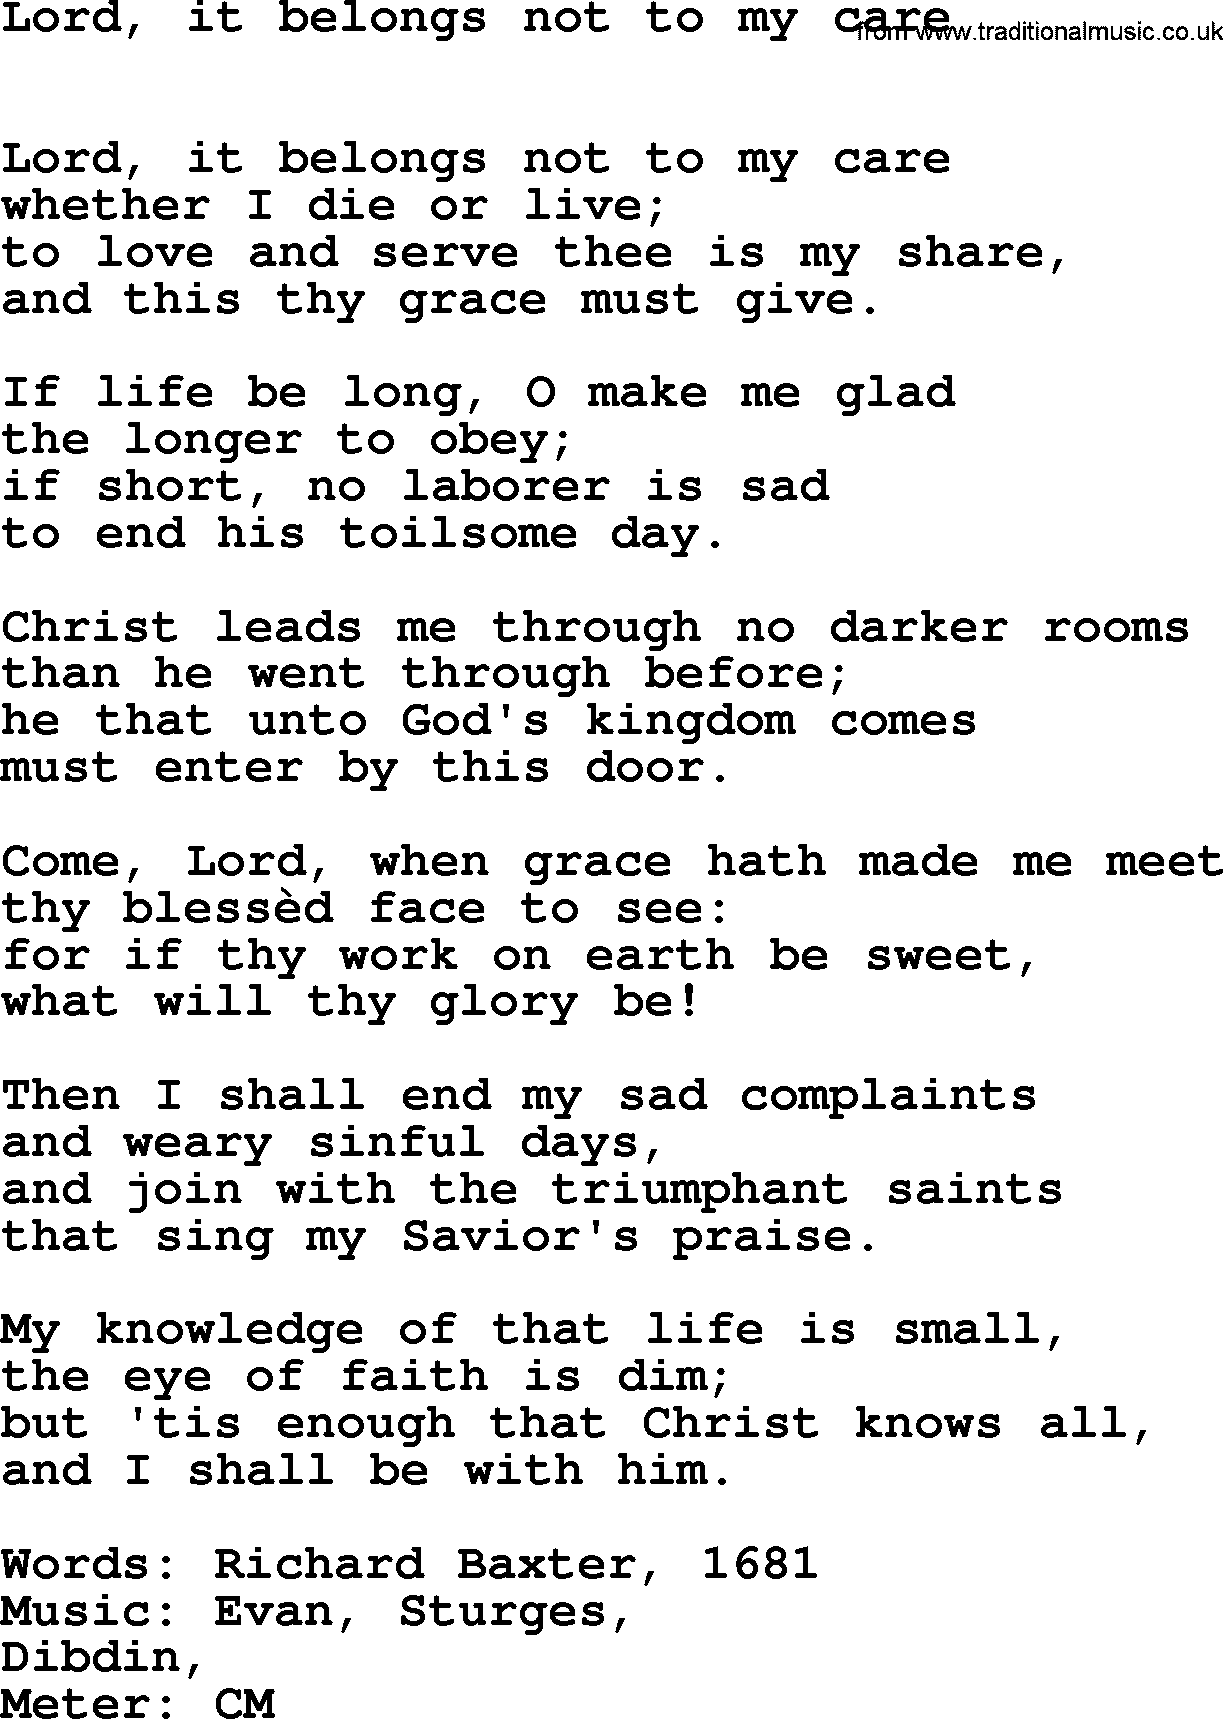 Book of Common Praise Hymn: Lord, It Belongs Not To My Care.txt lyrics with midi music